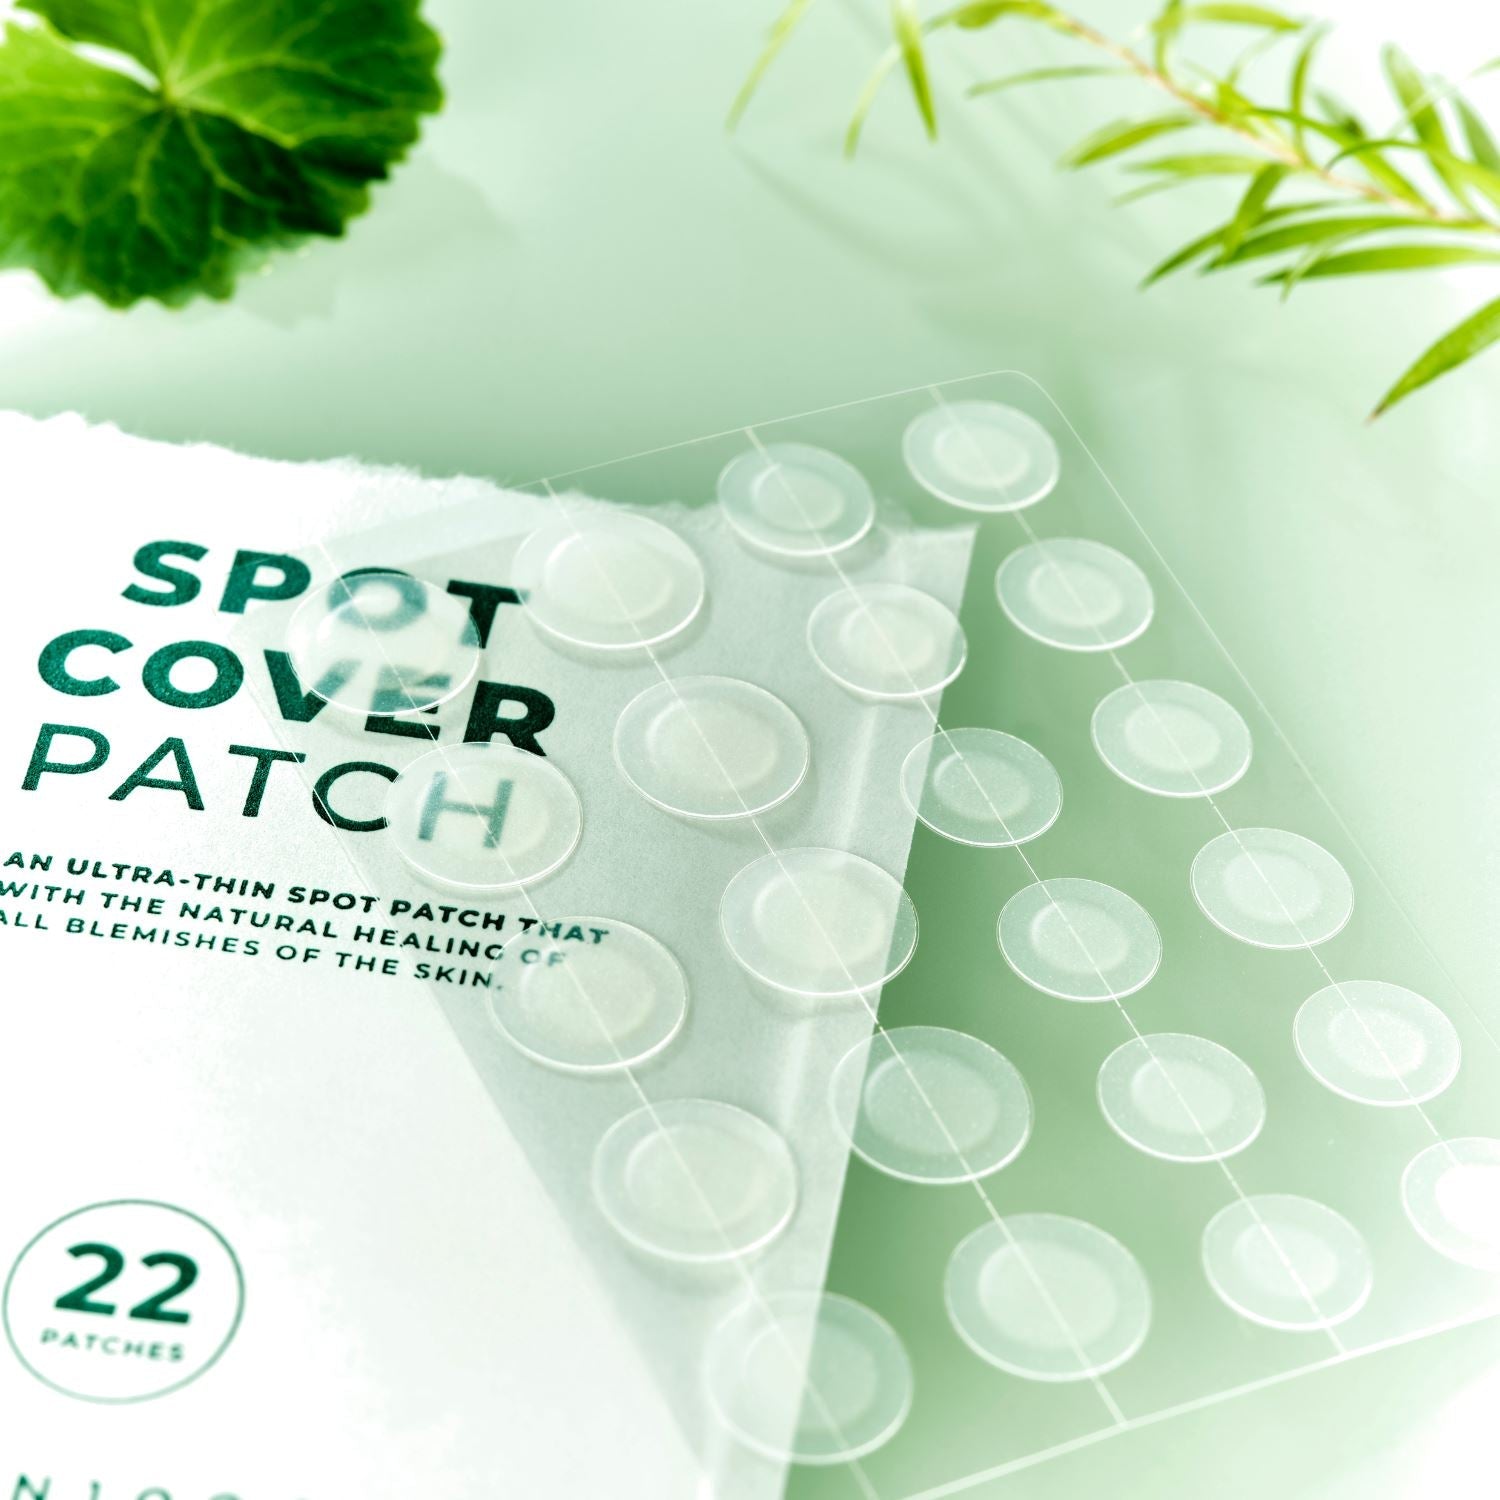 SKIN1004 Spot Cover Patch 22EA, at Orion Beauty. SKIN1004 Official Sole Authorized Retailer in Sri Lanka!